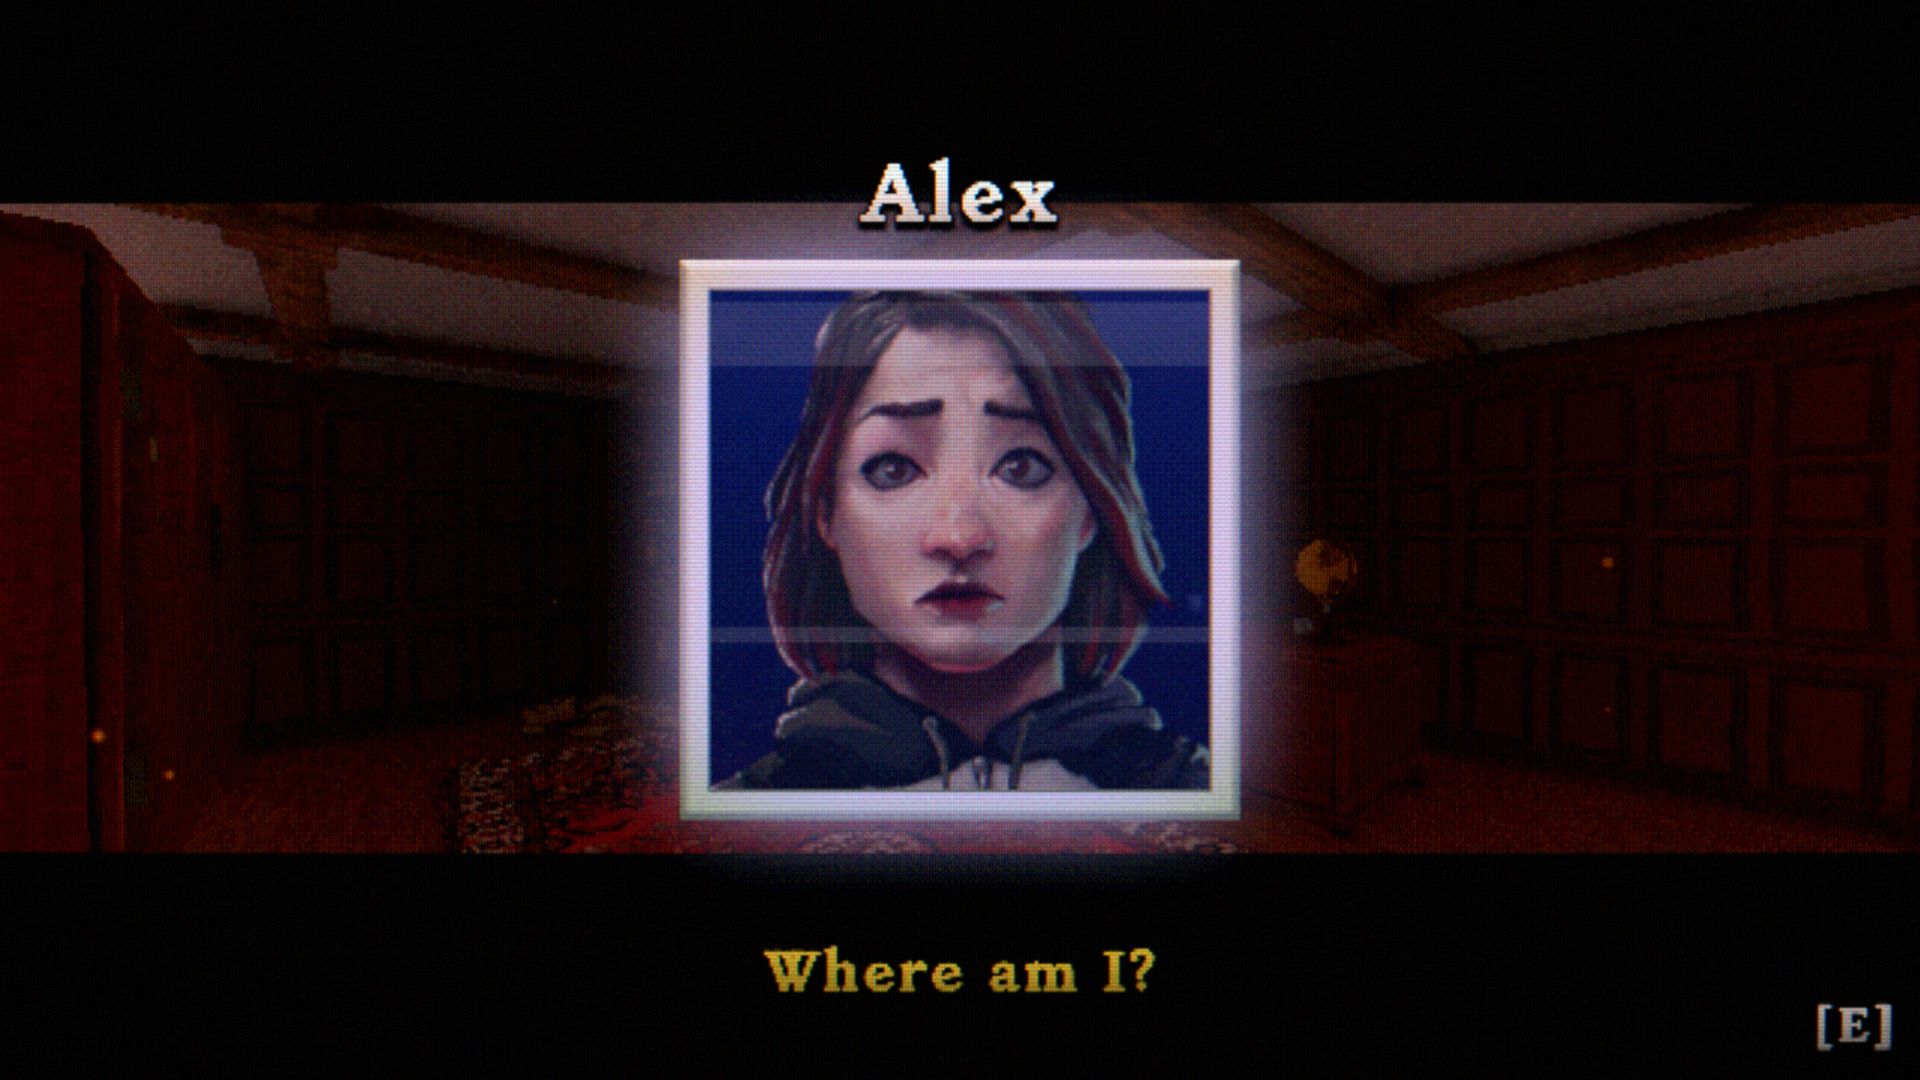 Alex, protagonist of The Tartarus Key, wakes up in the creepy mansion